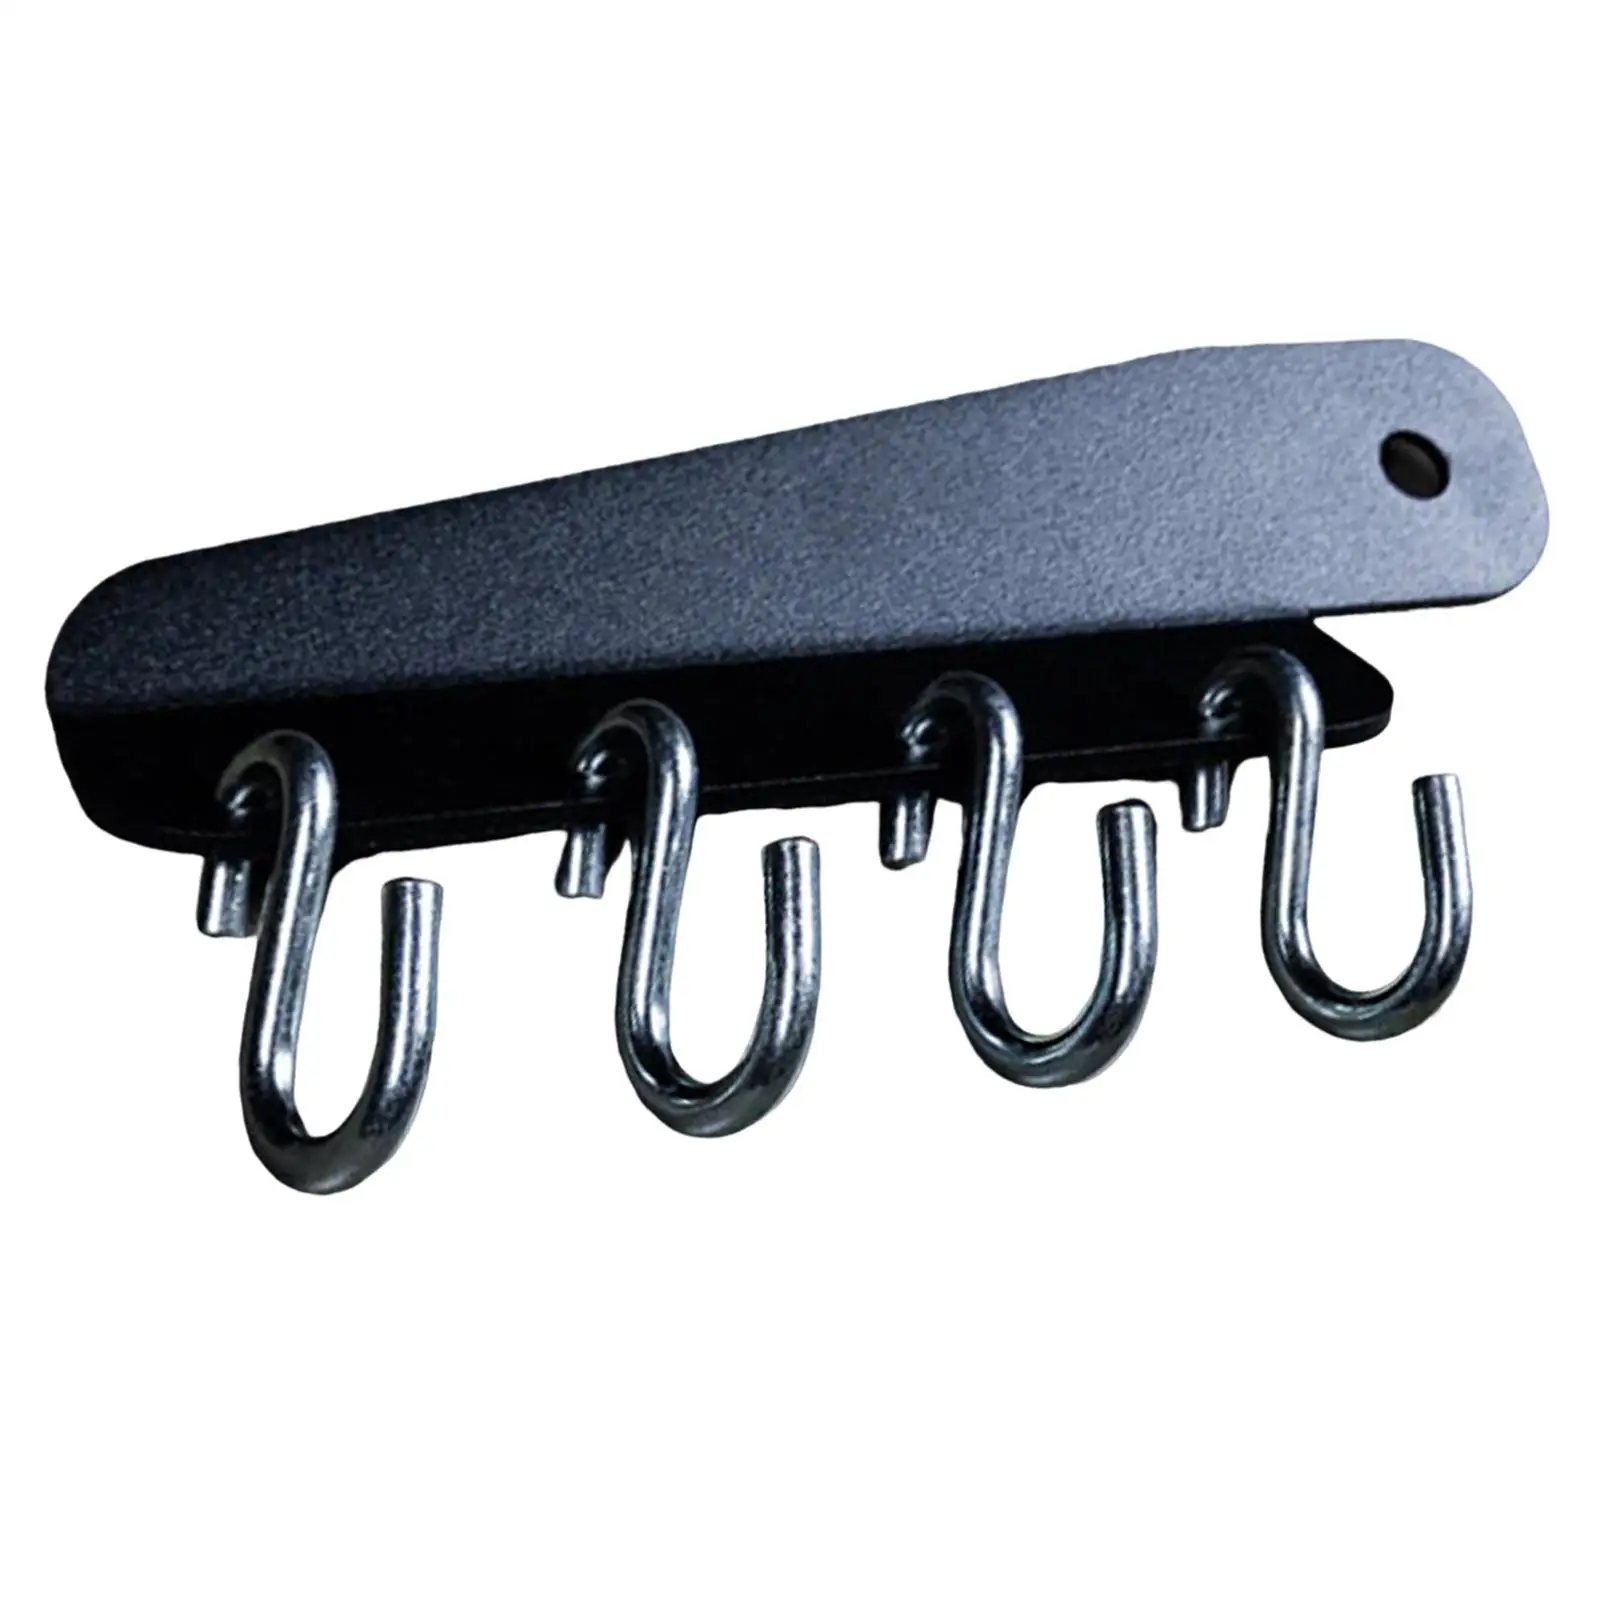 Gym Chains Rack Organizer Holder Wall Mount Training Exercise Hanging Hanger for